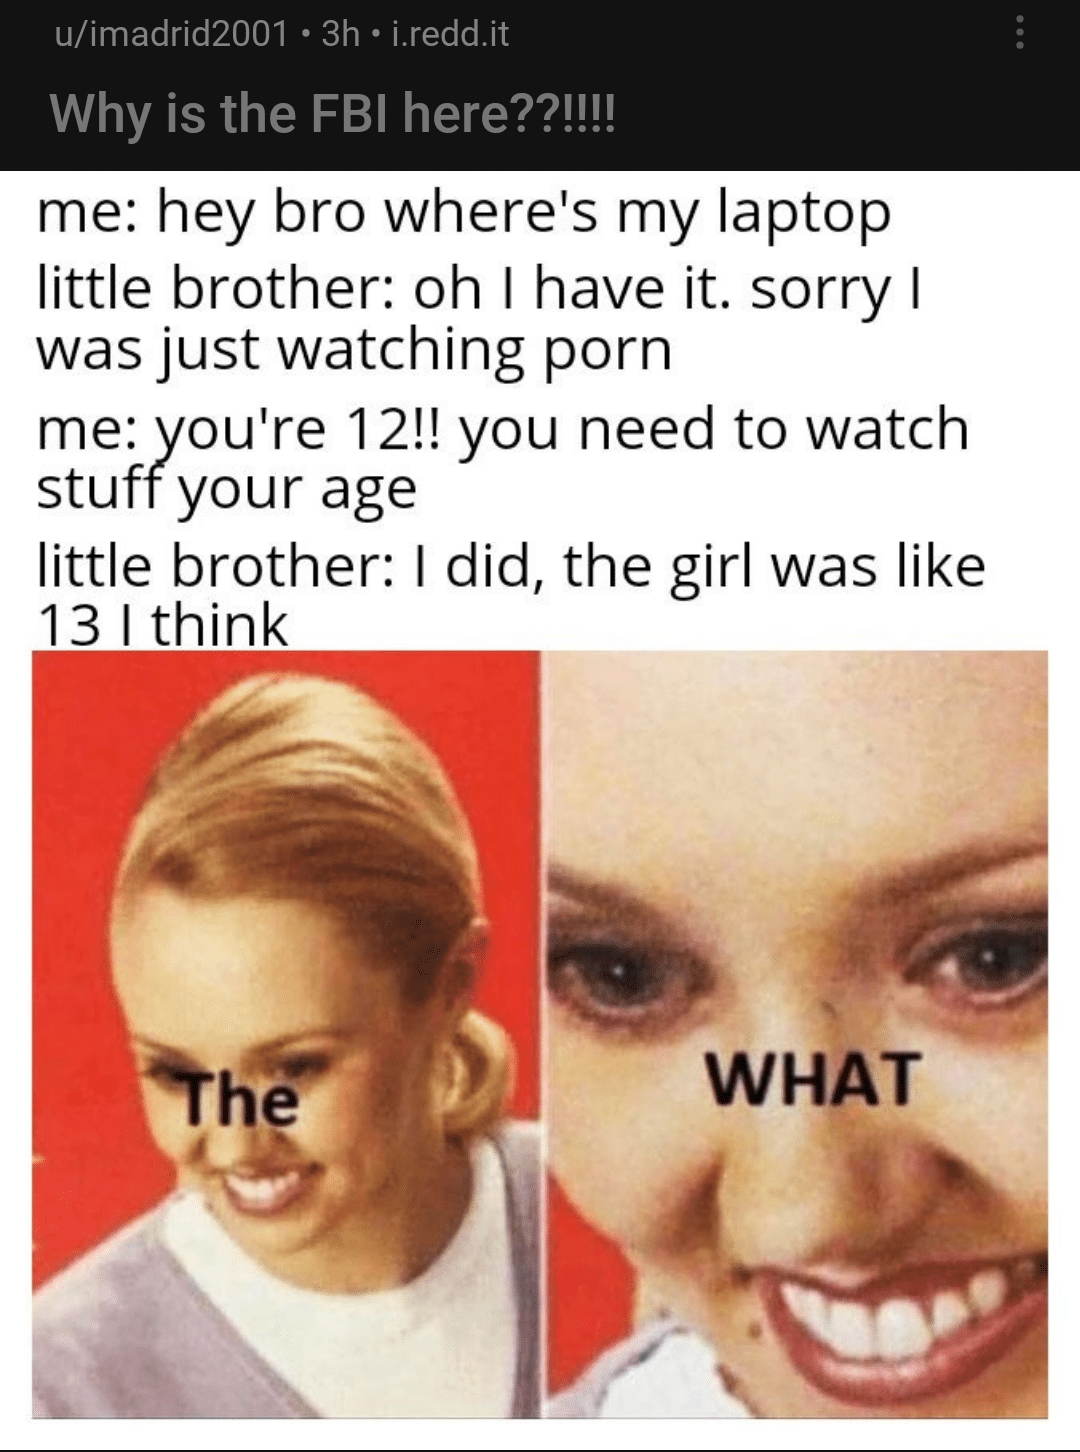 Hold up, Wheel, Spin, Reposter, HolUp, Asking Dank Memes Hold up, Wheel, Spin, Reposter, HolUp, Asking text: u/imadrid2001 • 3h • i.redd.it Why is the FBI here??!!!! me: hey bro where's my laptop little brother: oh I have it. sorry I was just watching porn me: you're 12!! you need to watch stuff your age little brother: I did, the girl was like 13 1 think 1, 'H WHAT 